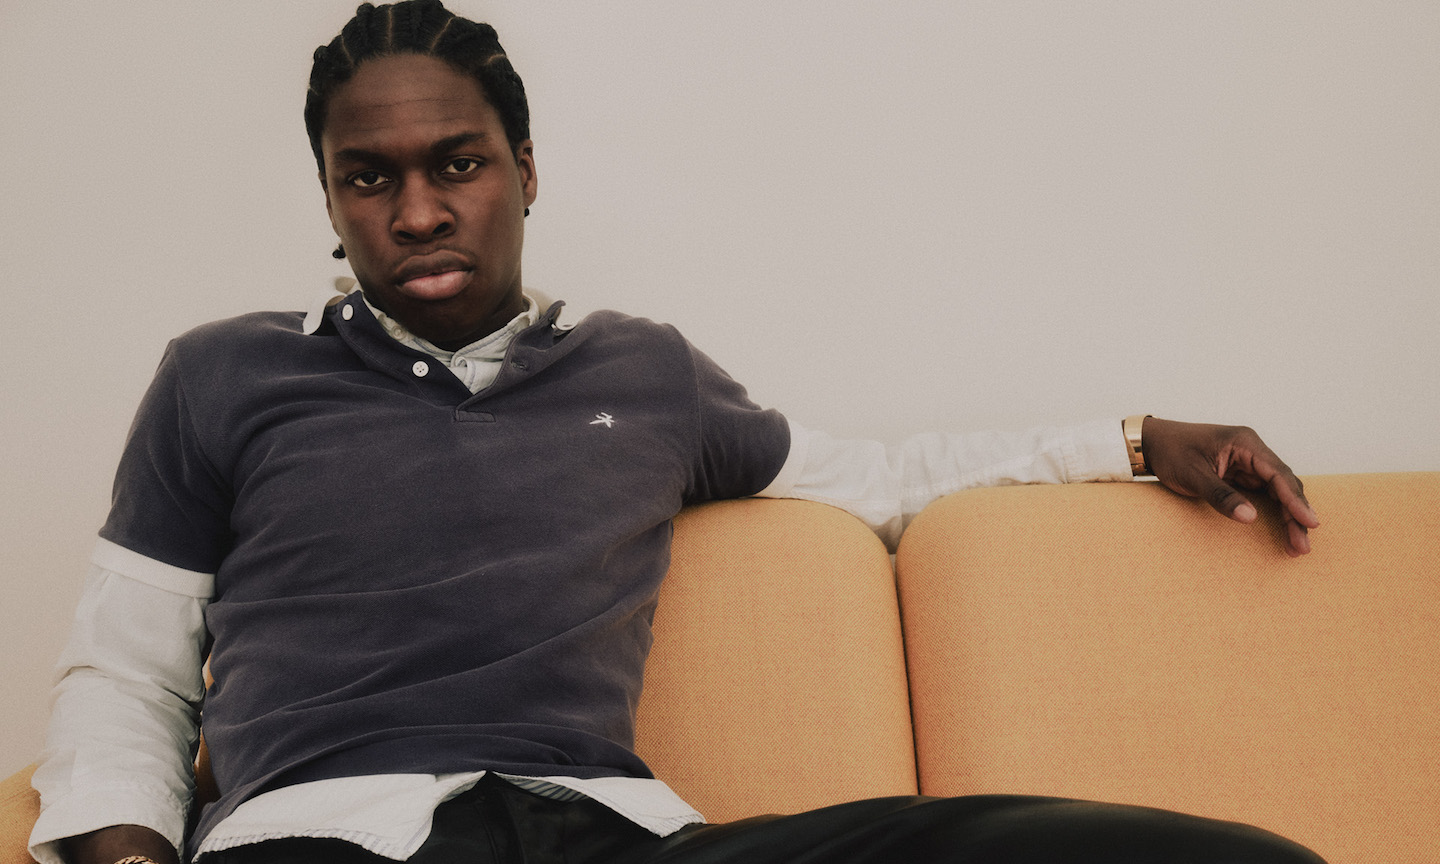 Daniel Caesar Talks 'Never Enough' Album and Taking on Producer Role